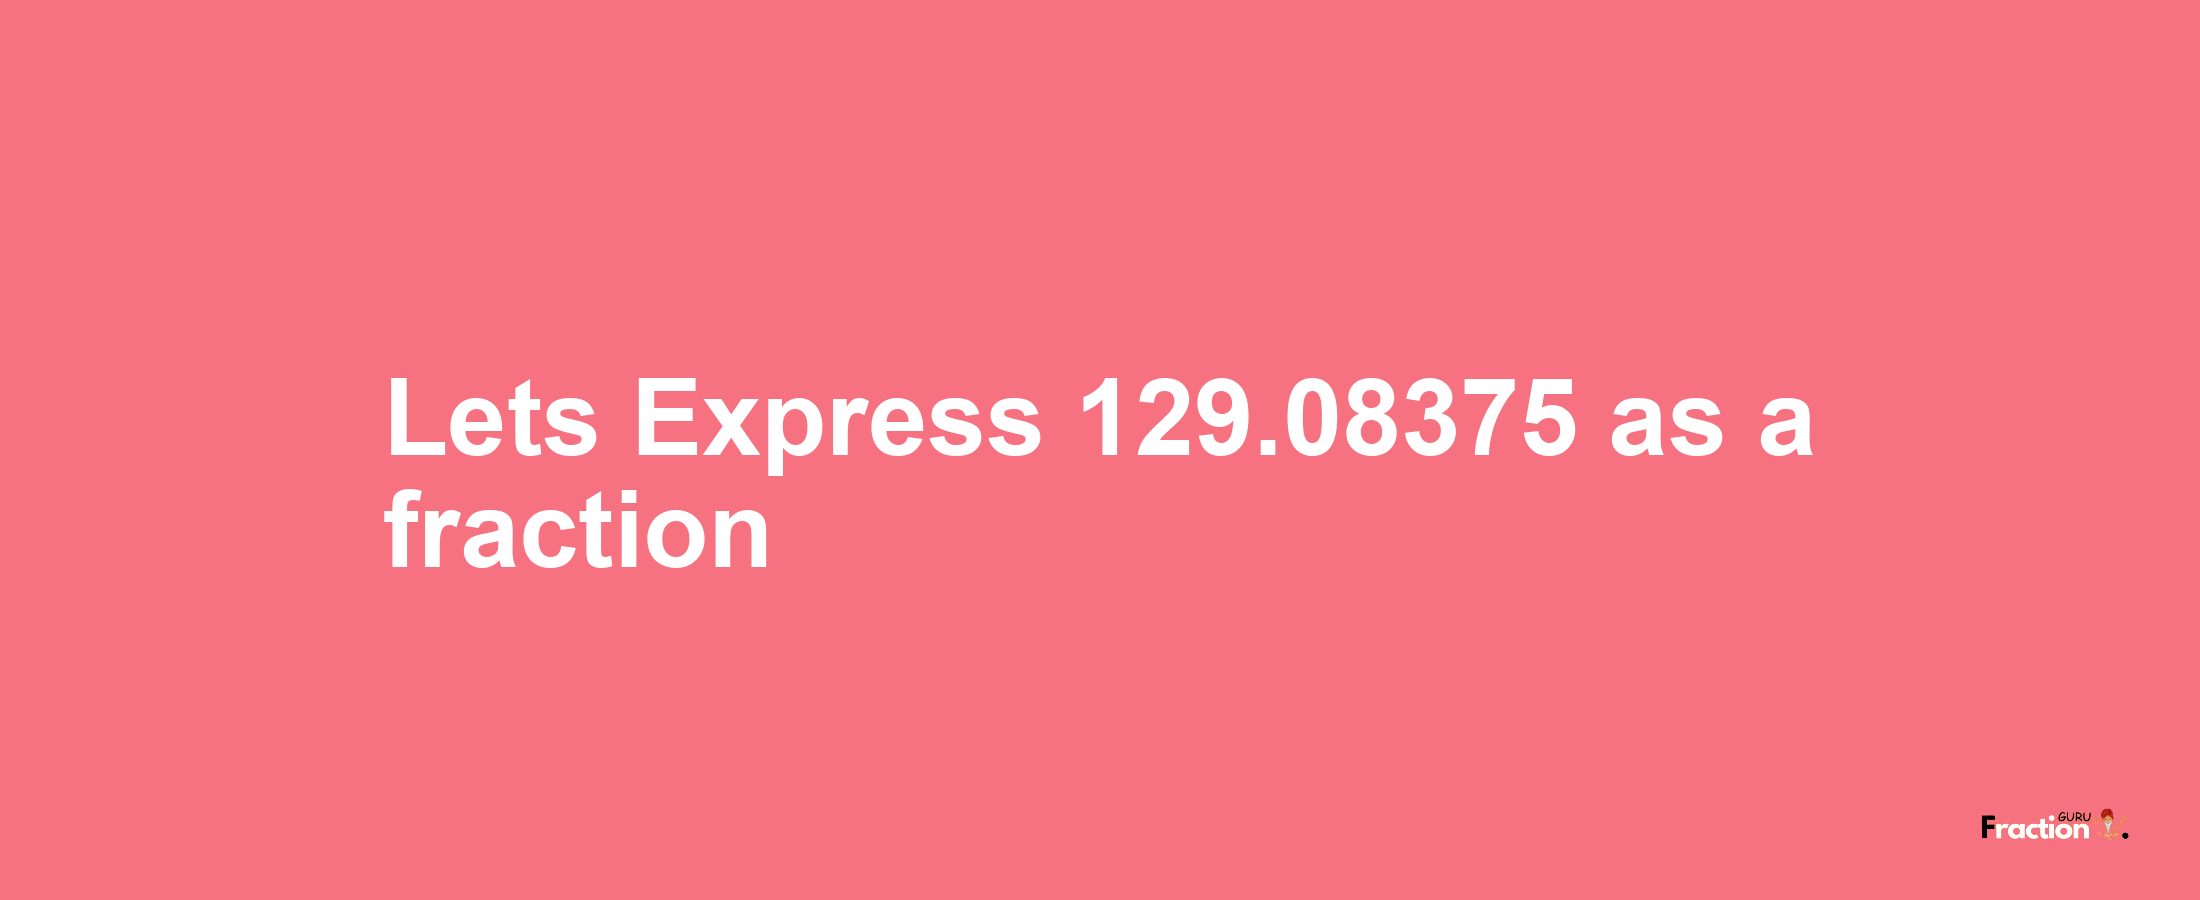 Lets Express 129.08375 as afraction